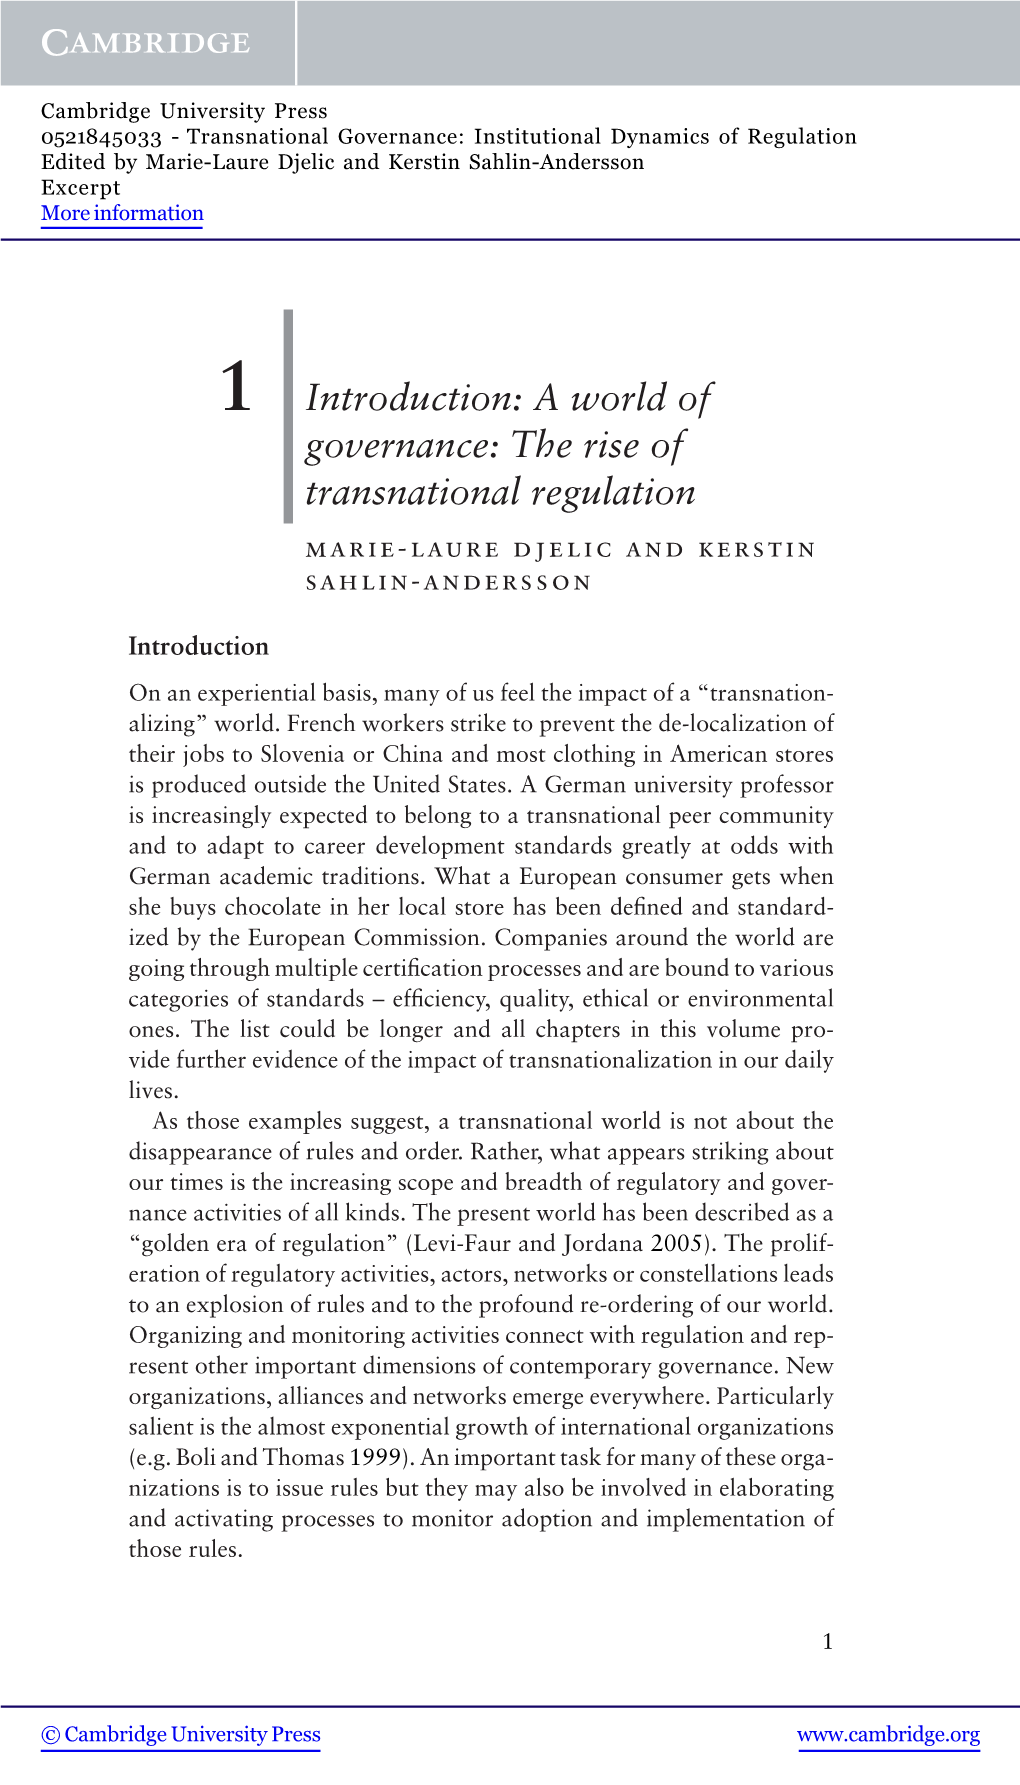 A World of Governance: the Rise of Transnational Regulation Marie-Laure Djelic and Kerstin Sahlin-Andersson